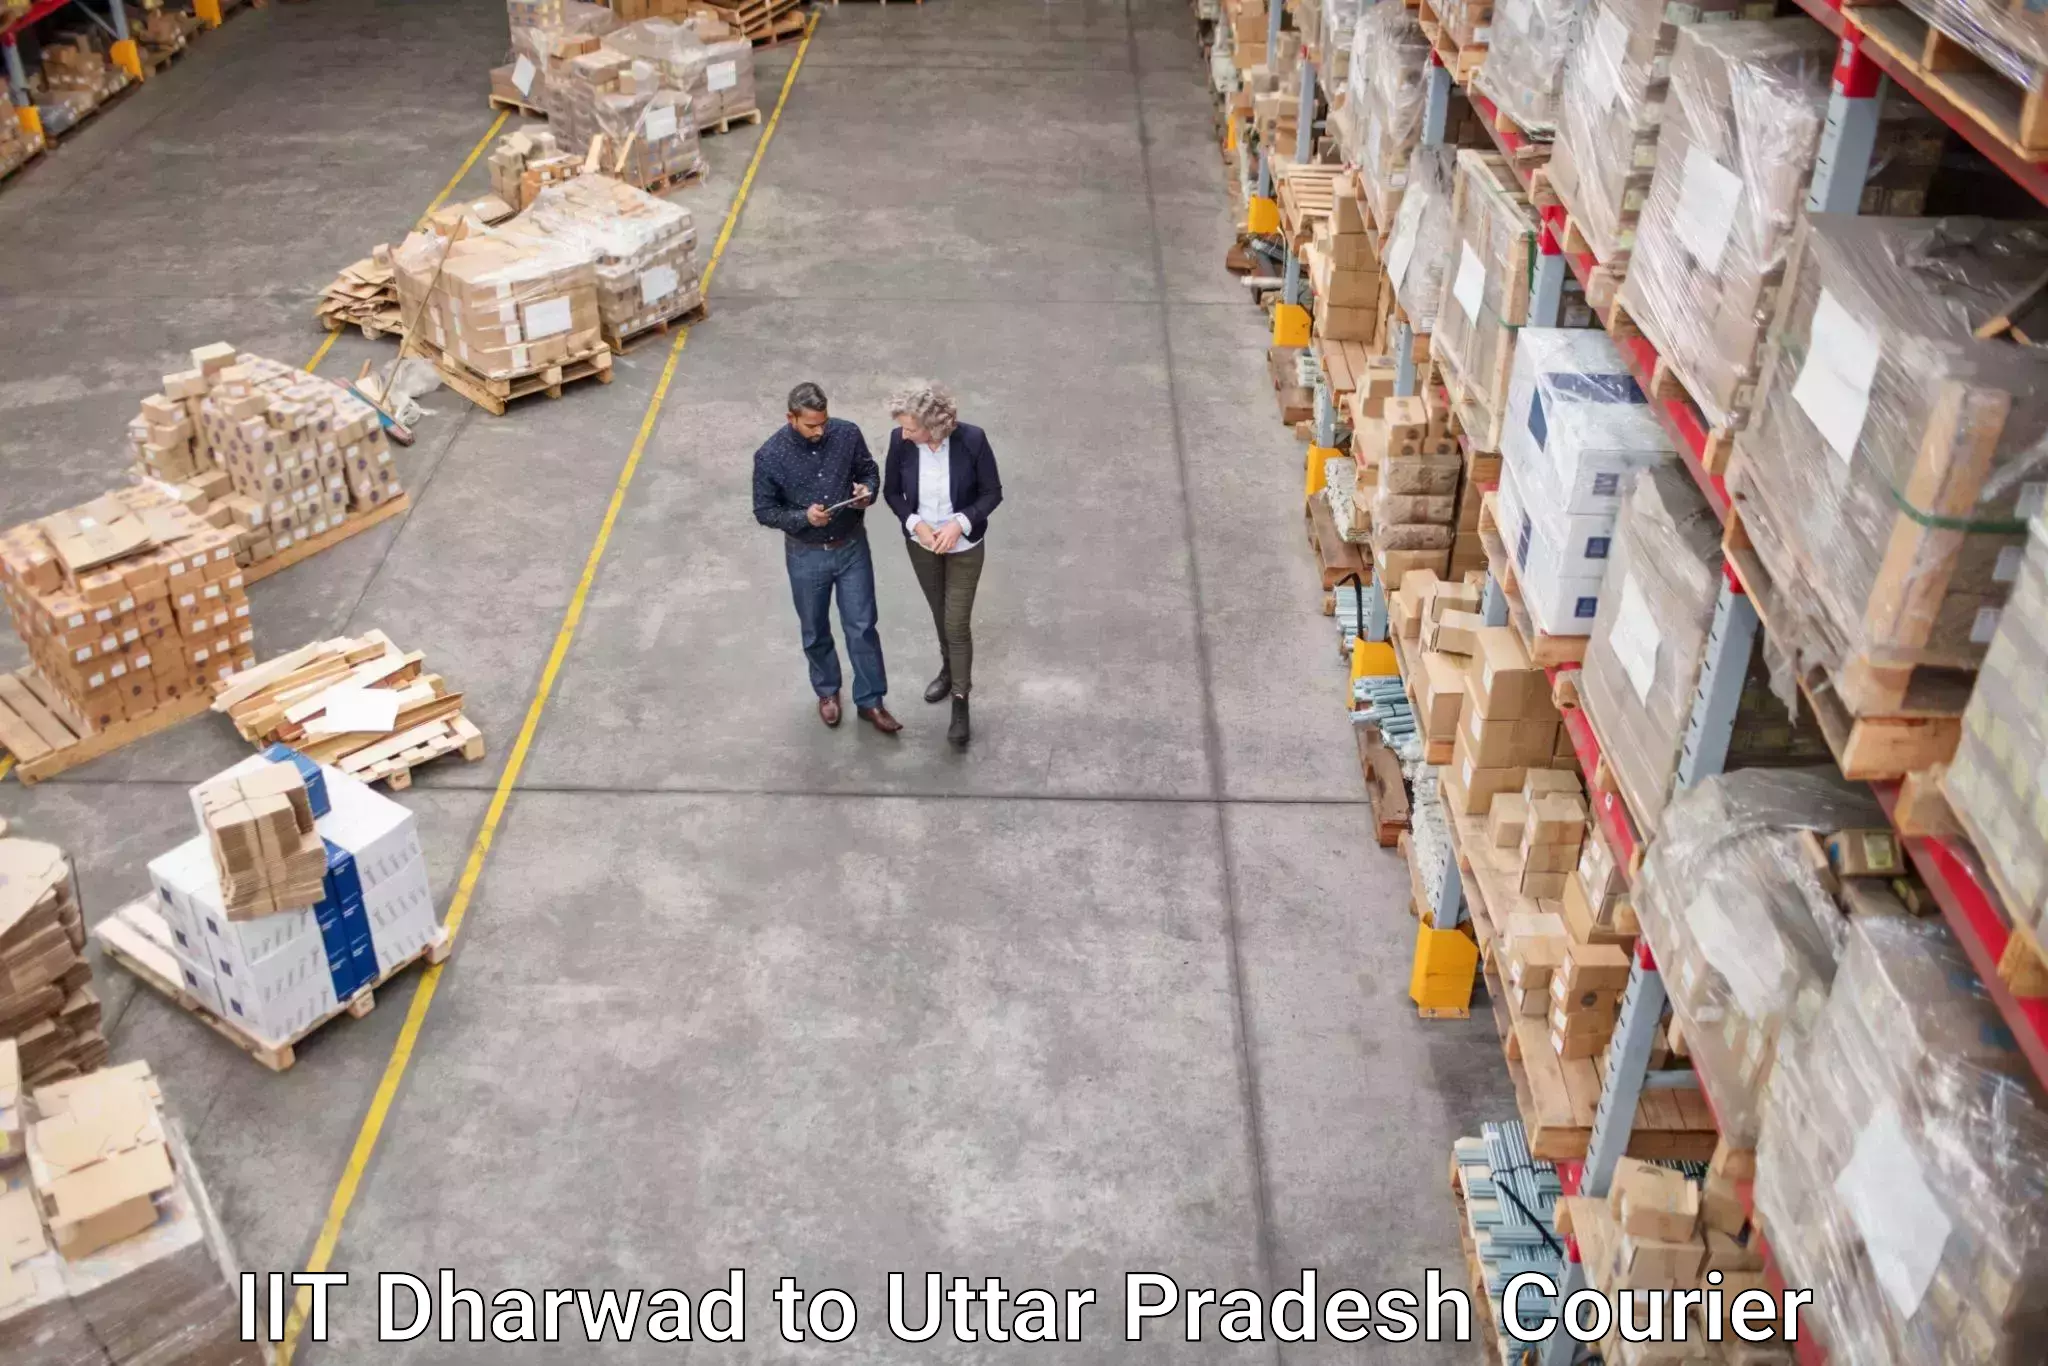 Quality courier services IIT Dharwad to Allahabad